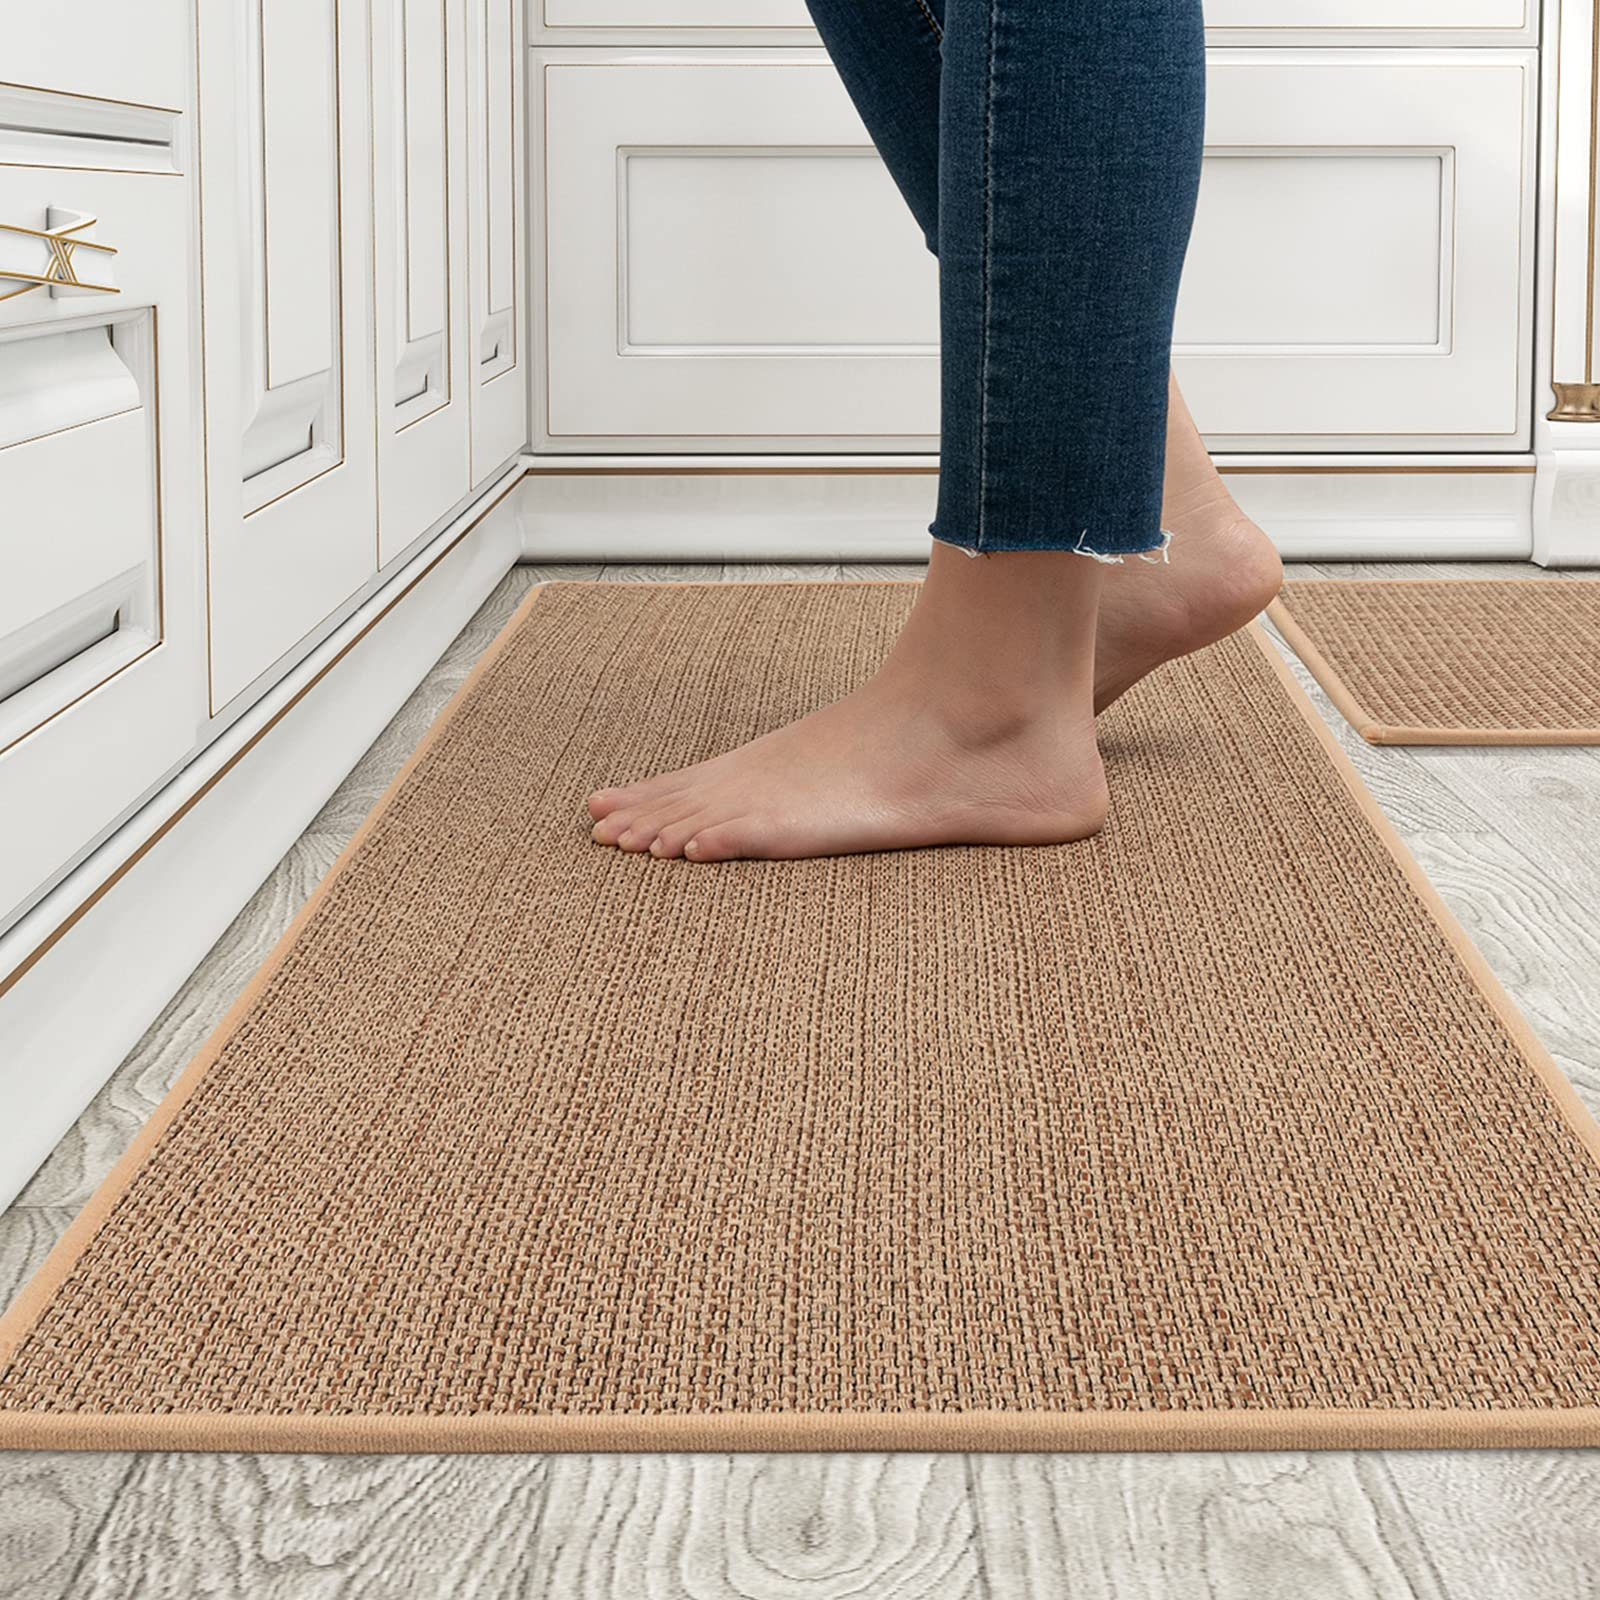 Eider Ivory Kitchen Rugs And Mats Washable 2 Pcs Non Skid Natural Rubber Kitchen Mats For Floor Runner Rugs Set For Kitchen Floor Front Of Sink Hallway Laundry Room Wayfair